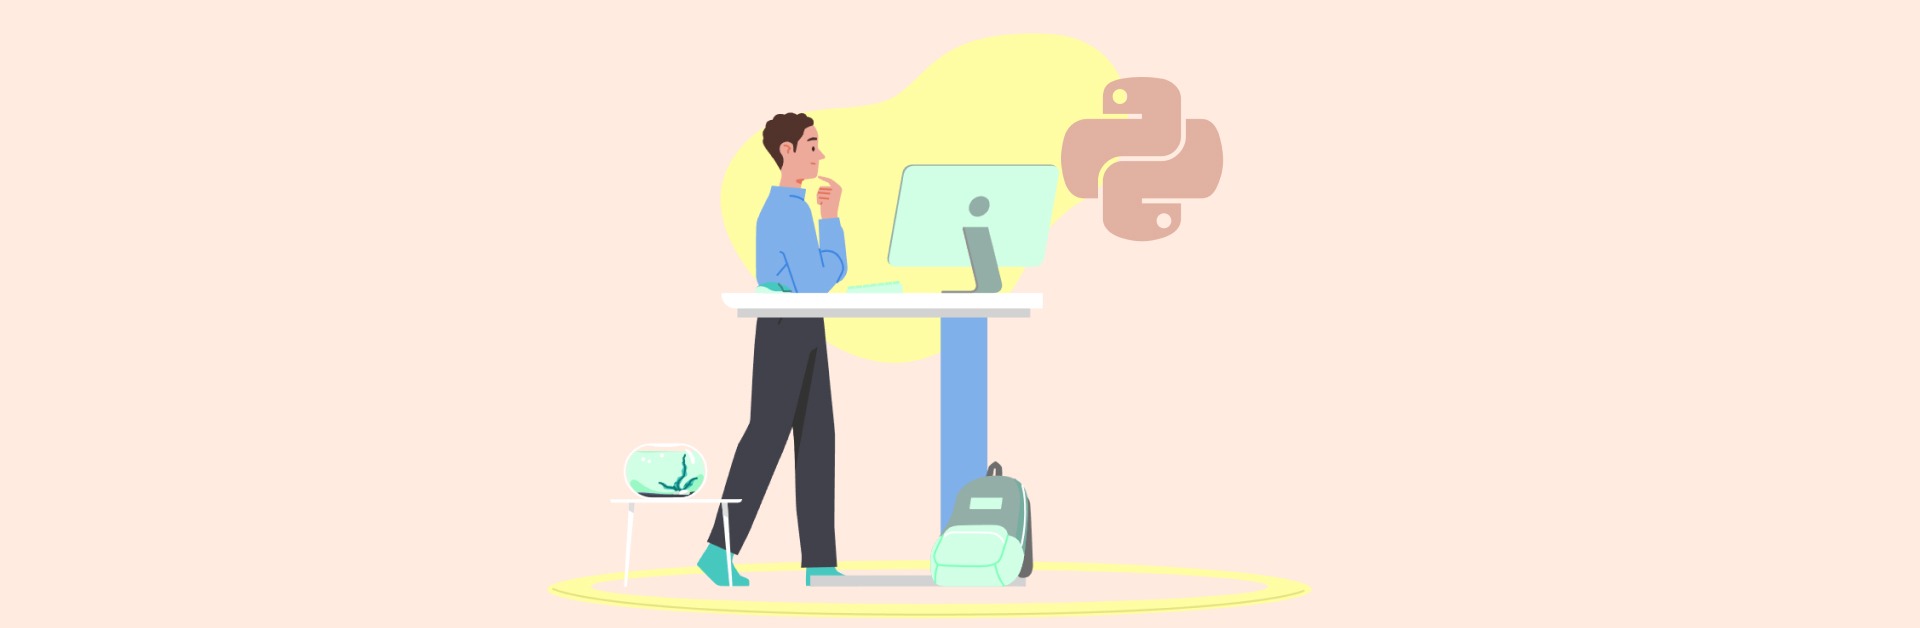 Python Job Search Strategies:  How to Find and Apply for Python Jobs